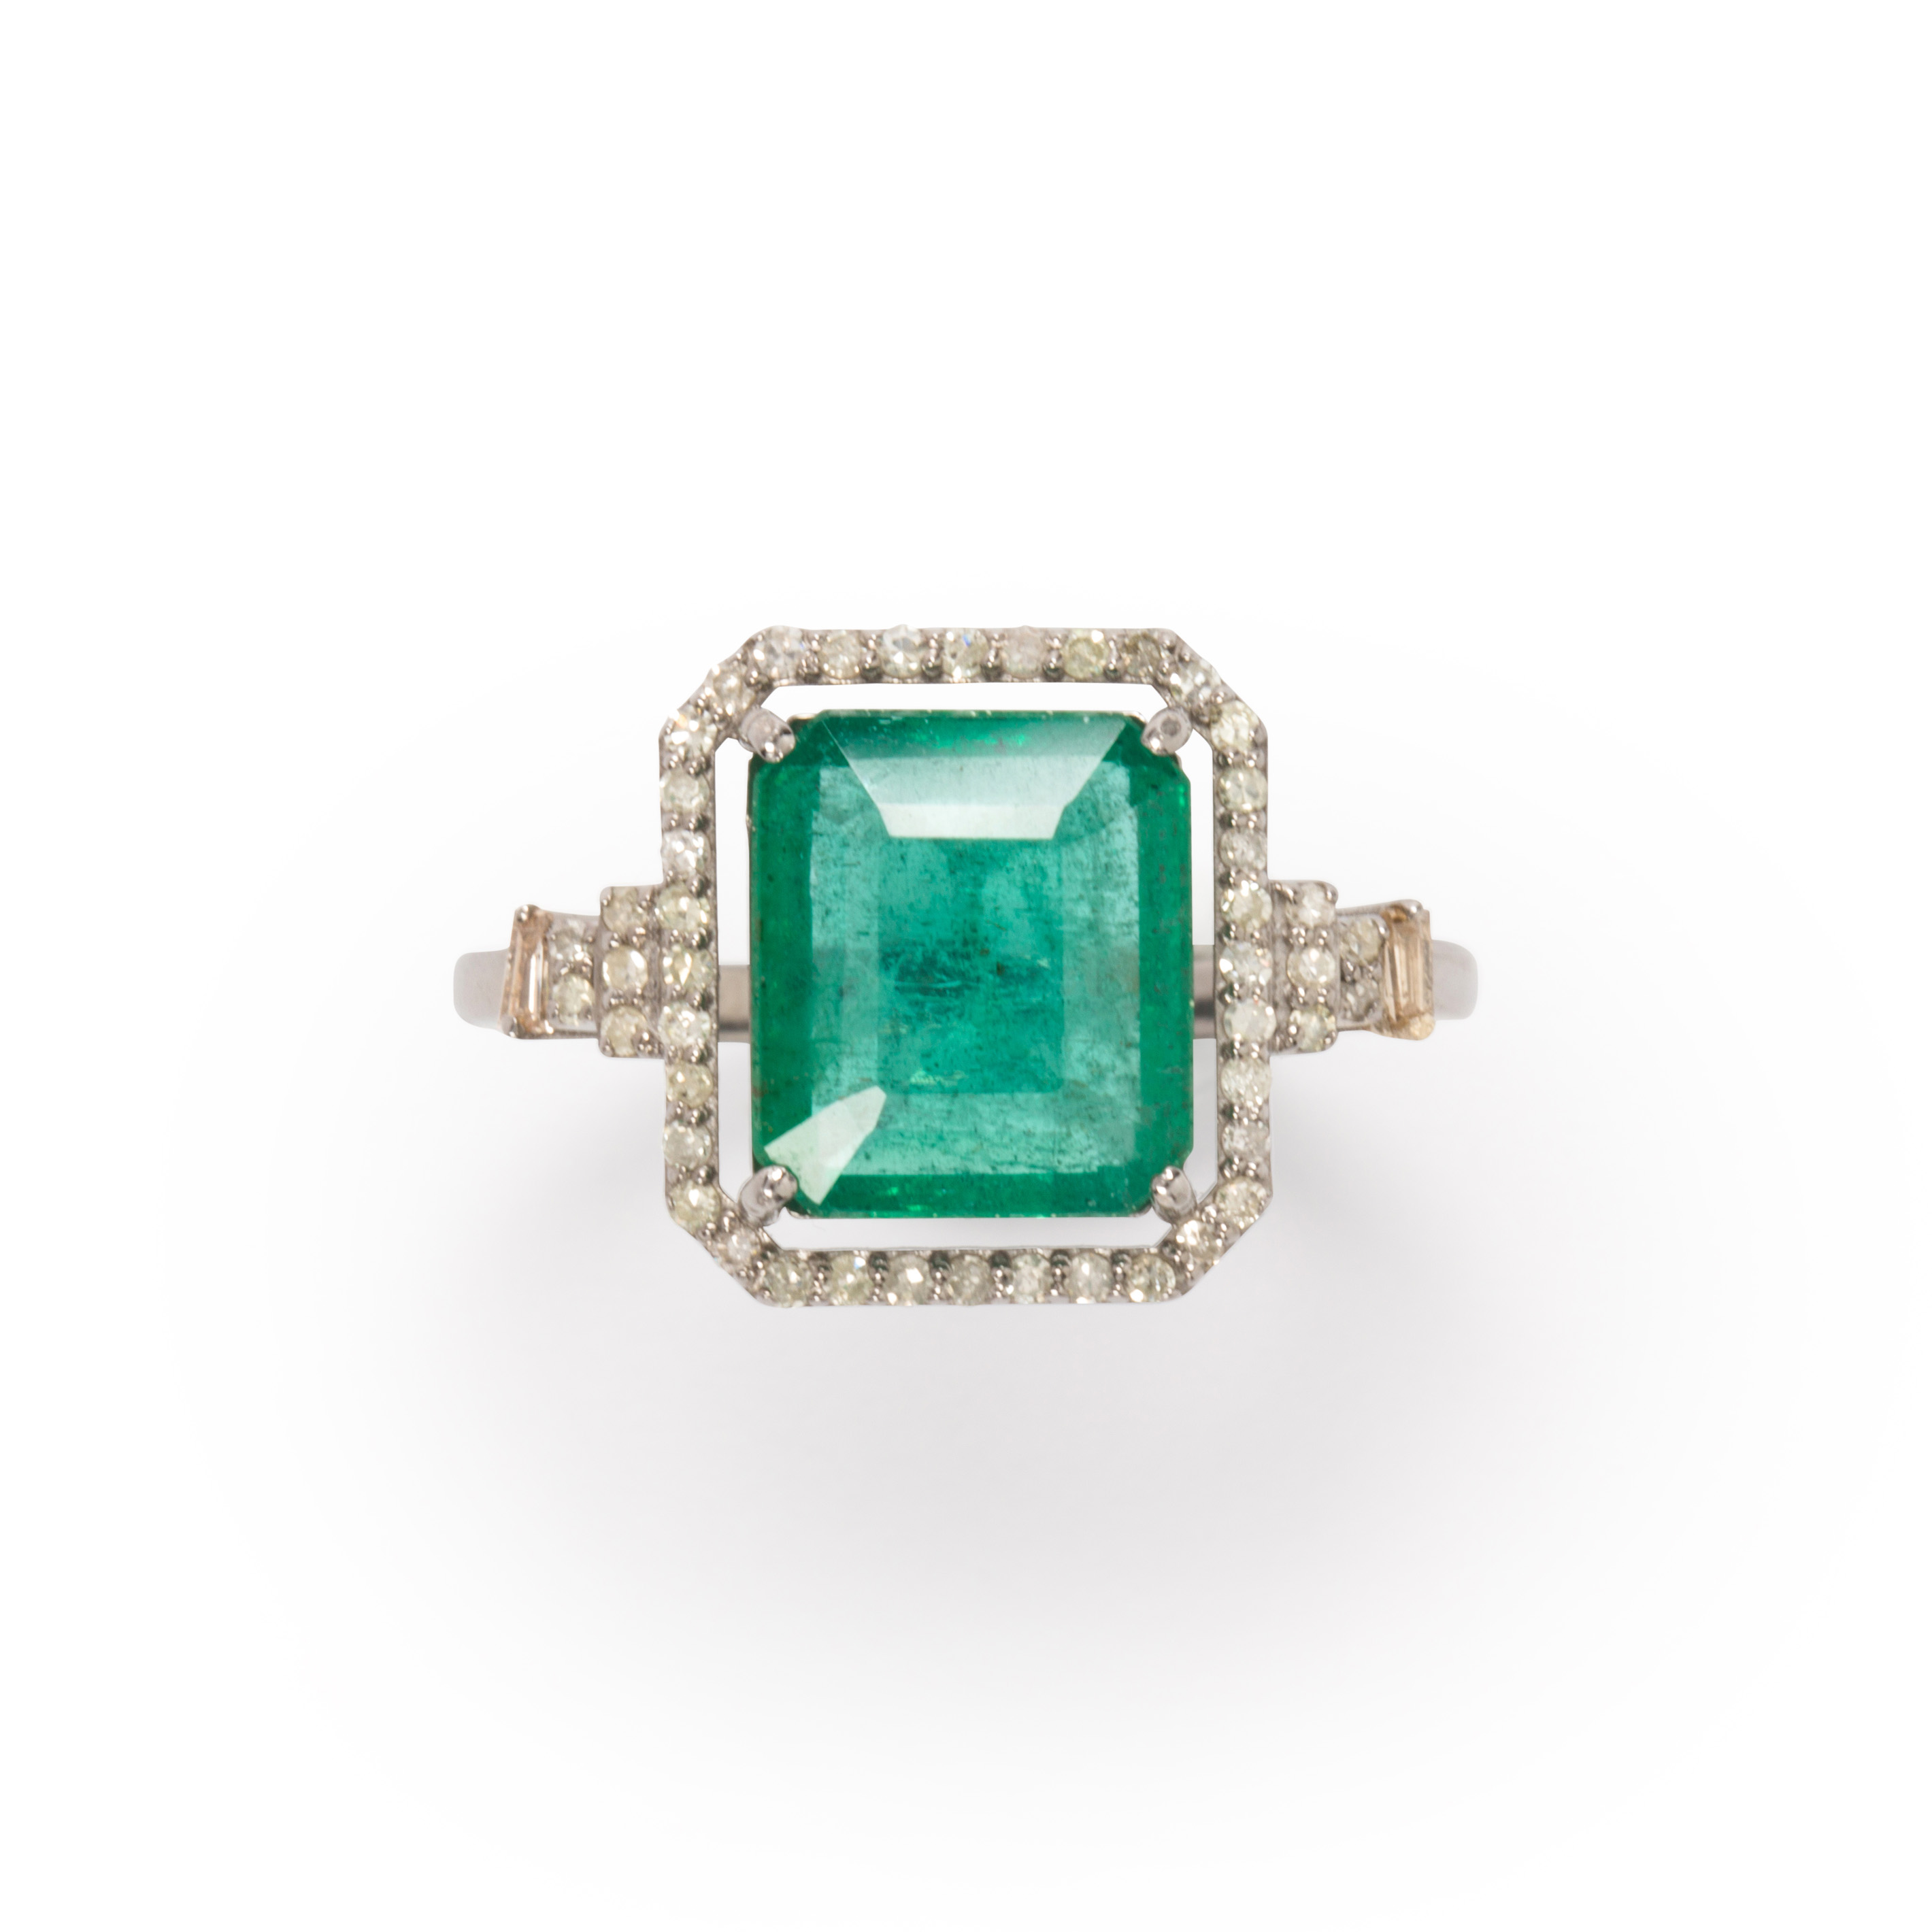 AN EMERALD AND DIAMOND RING An